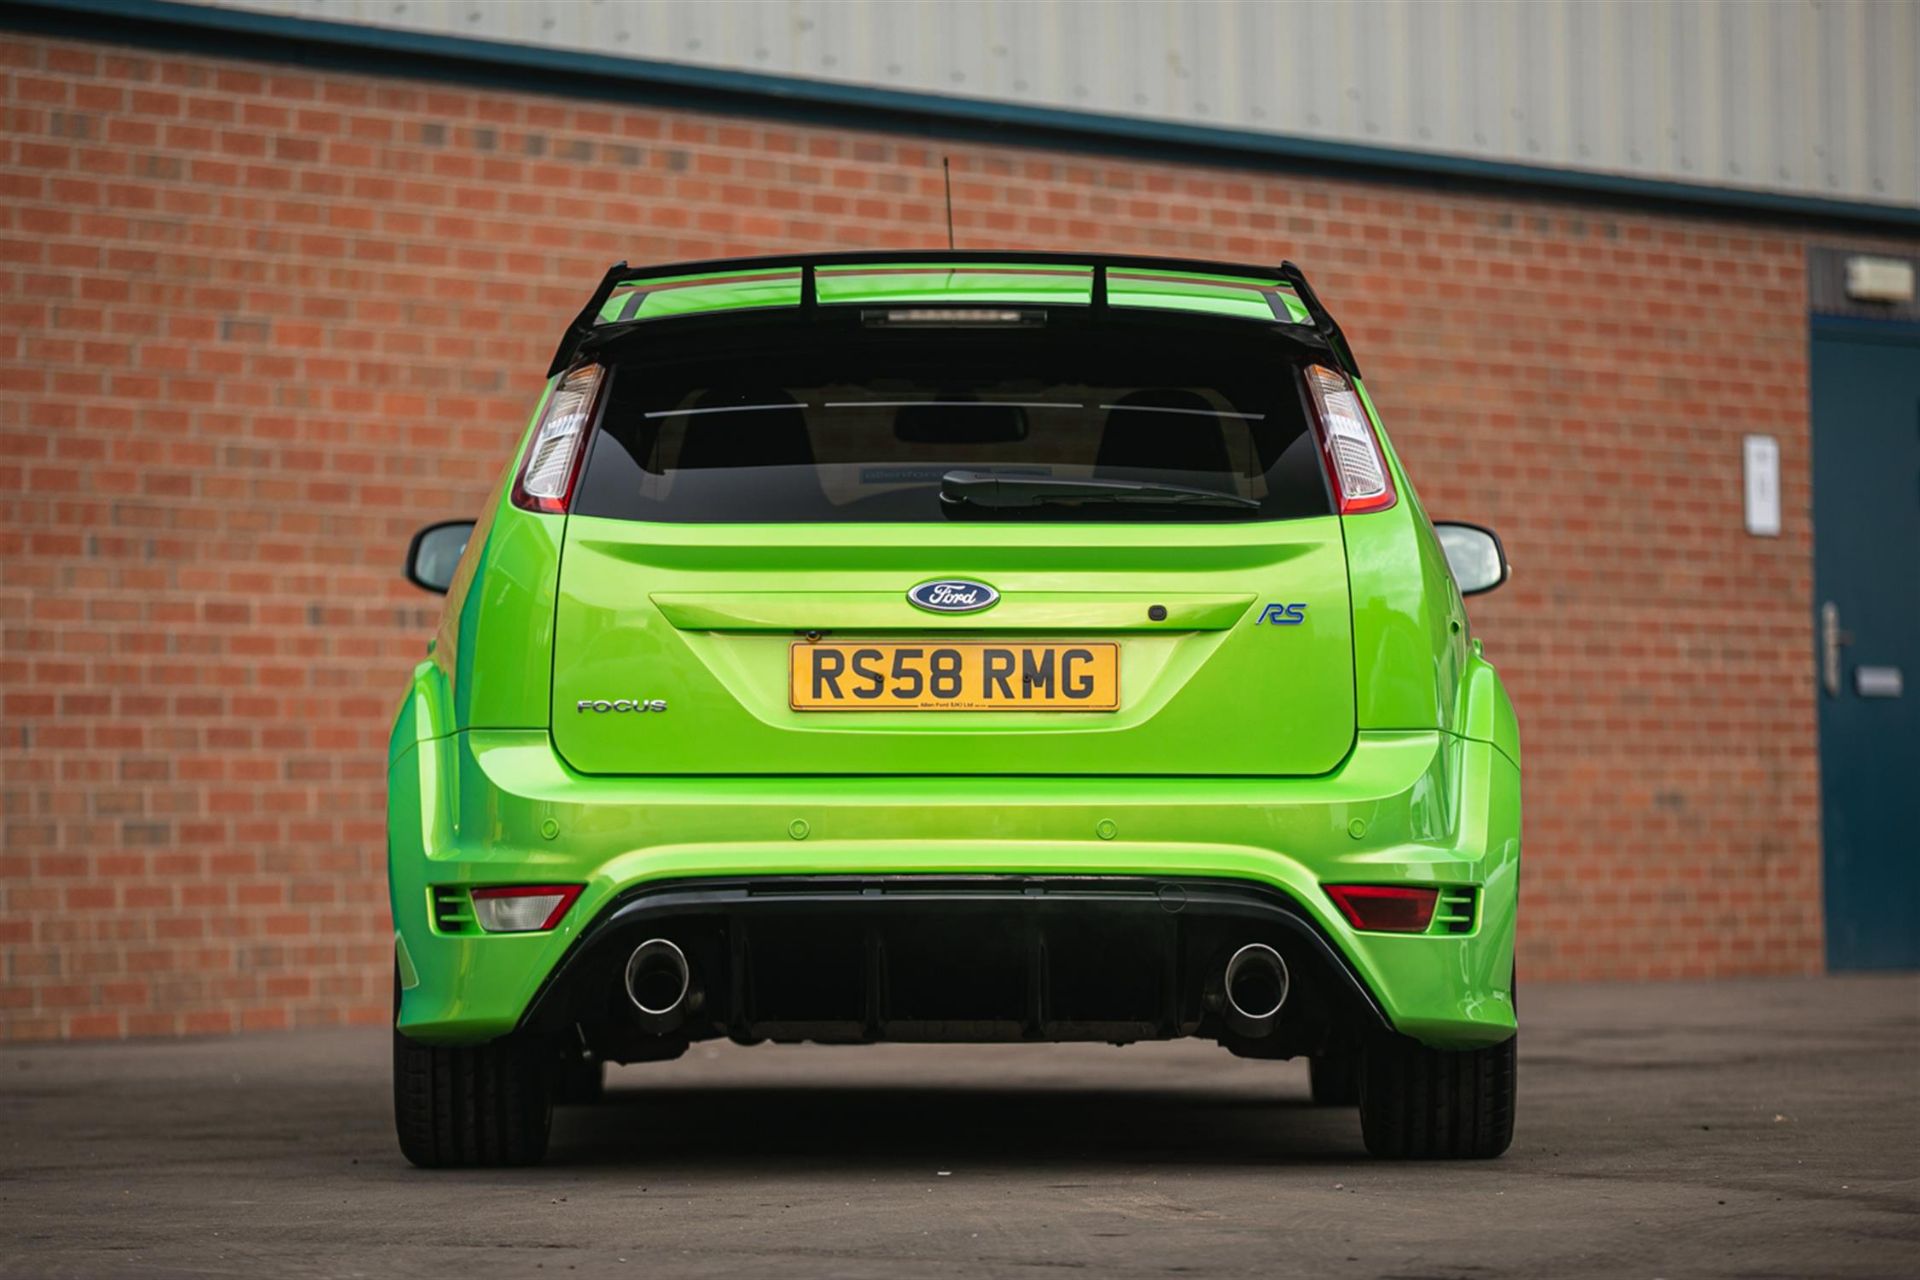 2010 Ford Focus RS Mk2 - Image 6 of 10